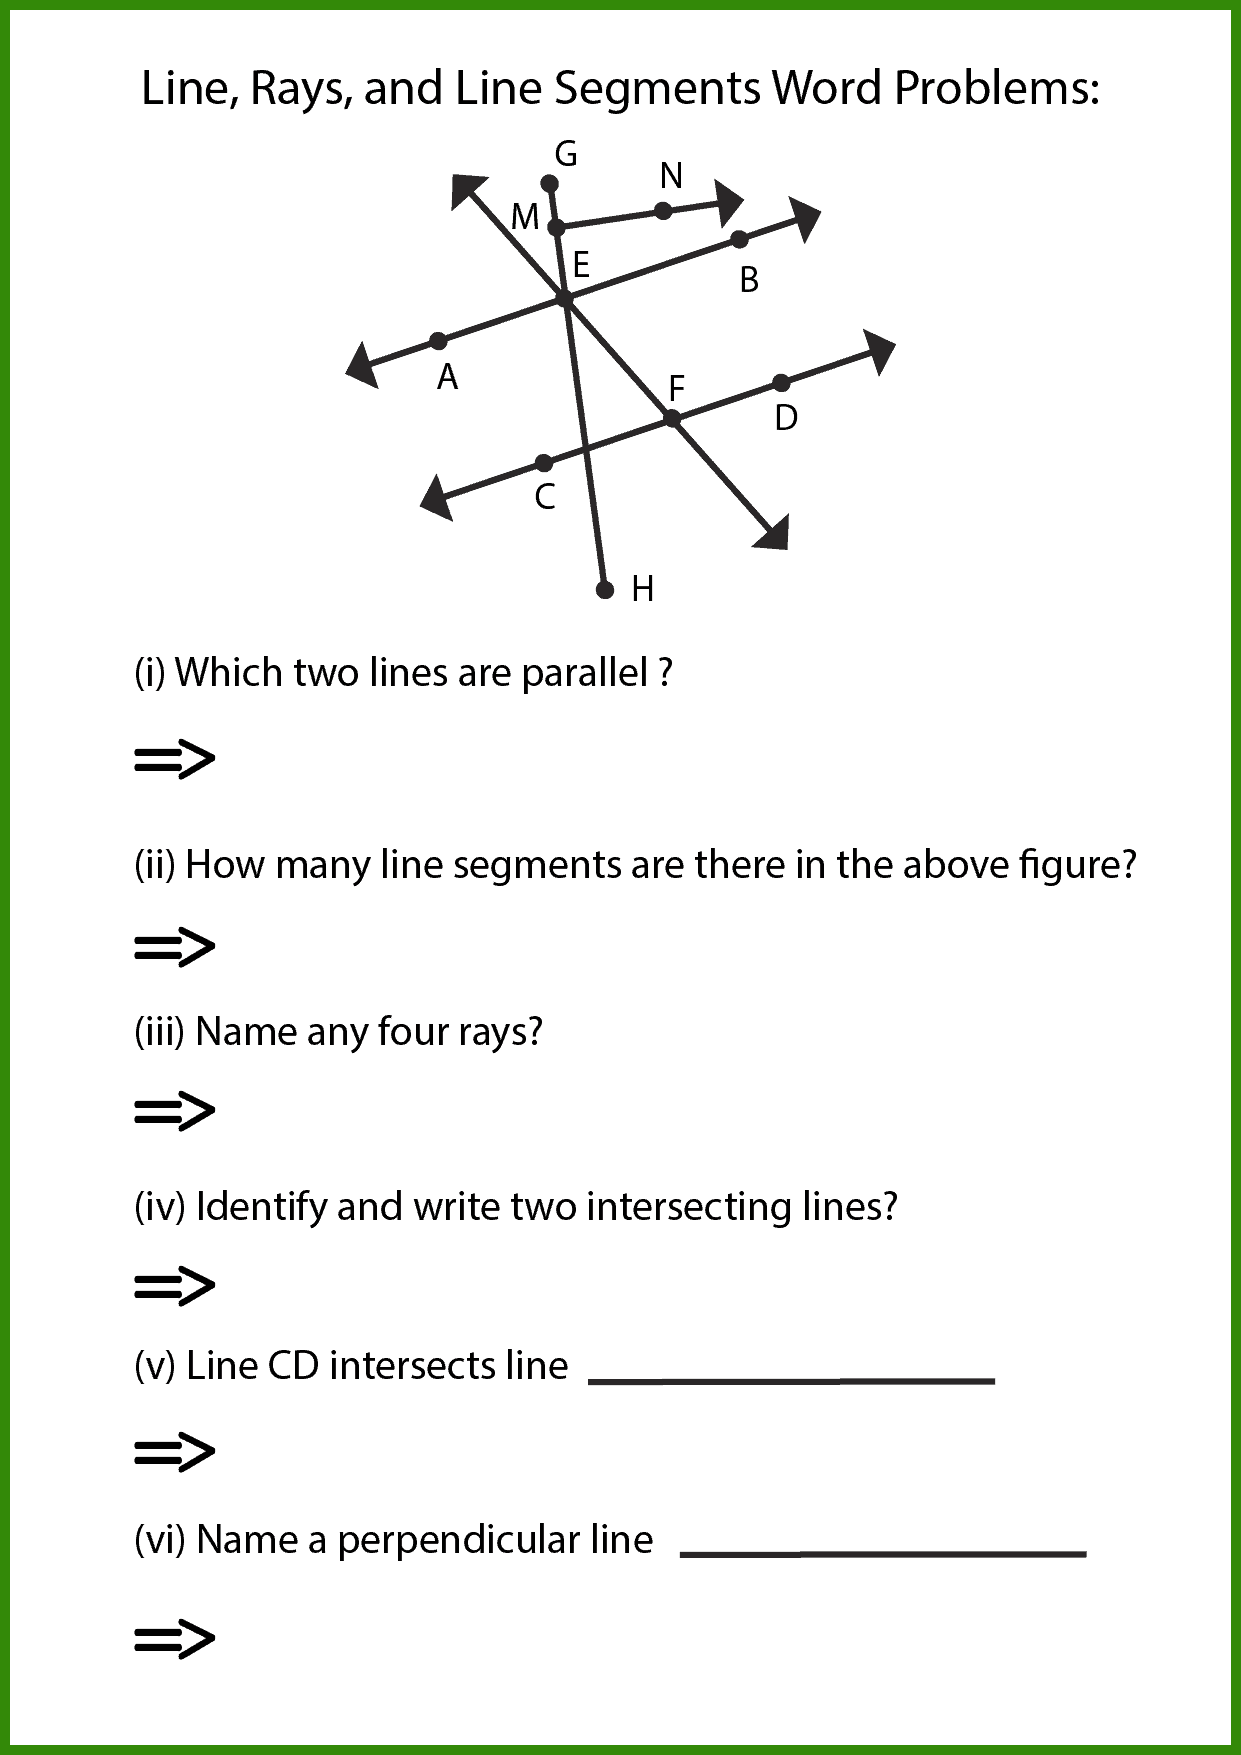 8- Word Problems of Lines, Rays, and Line Segments